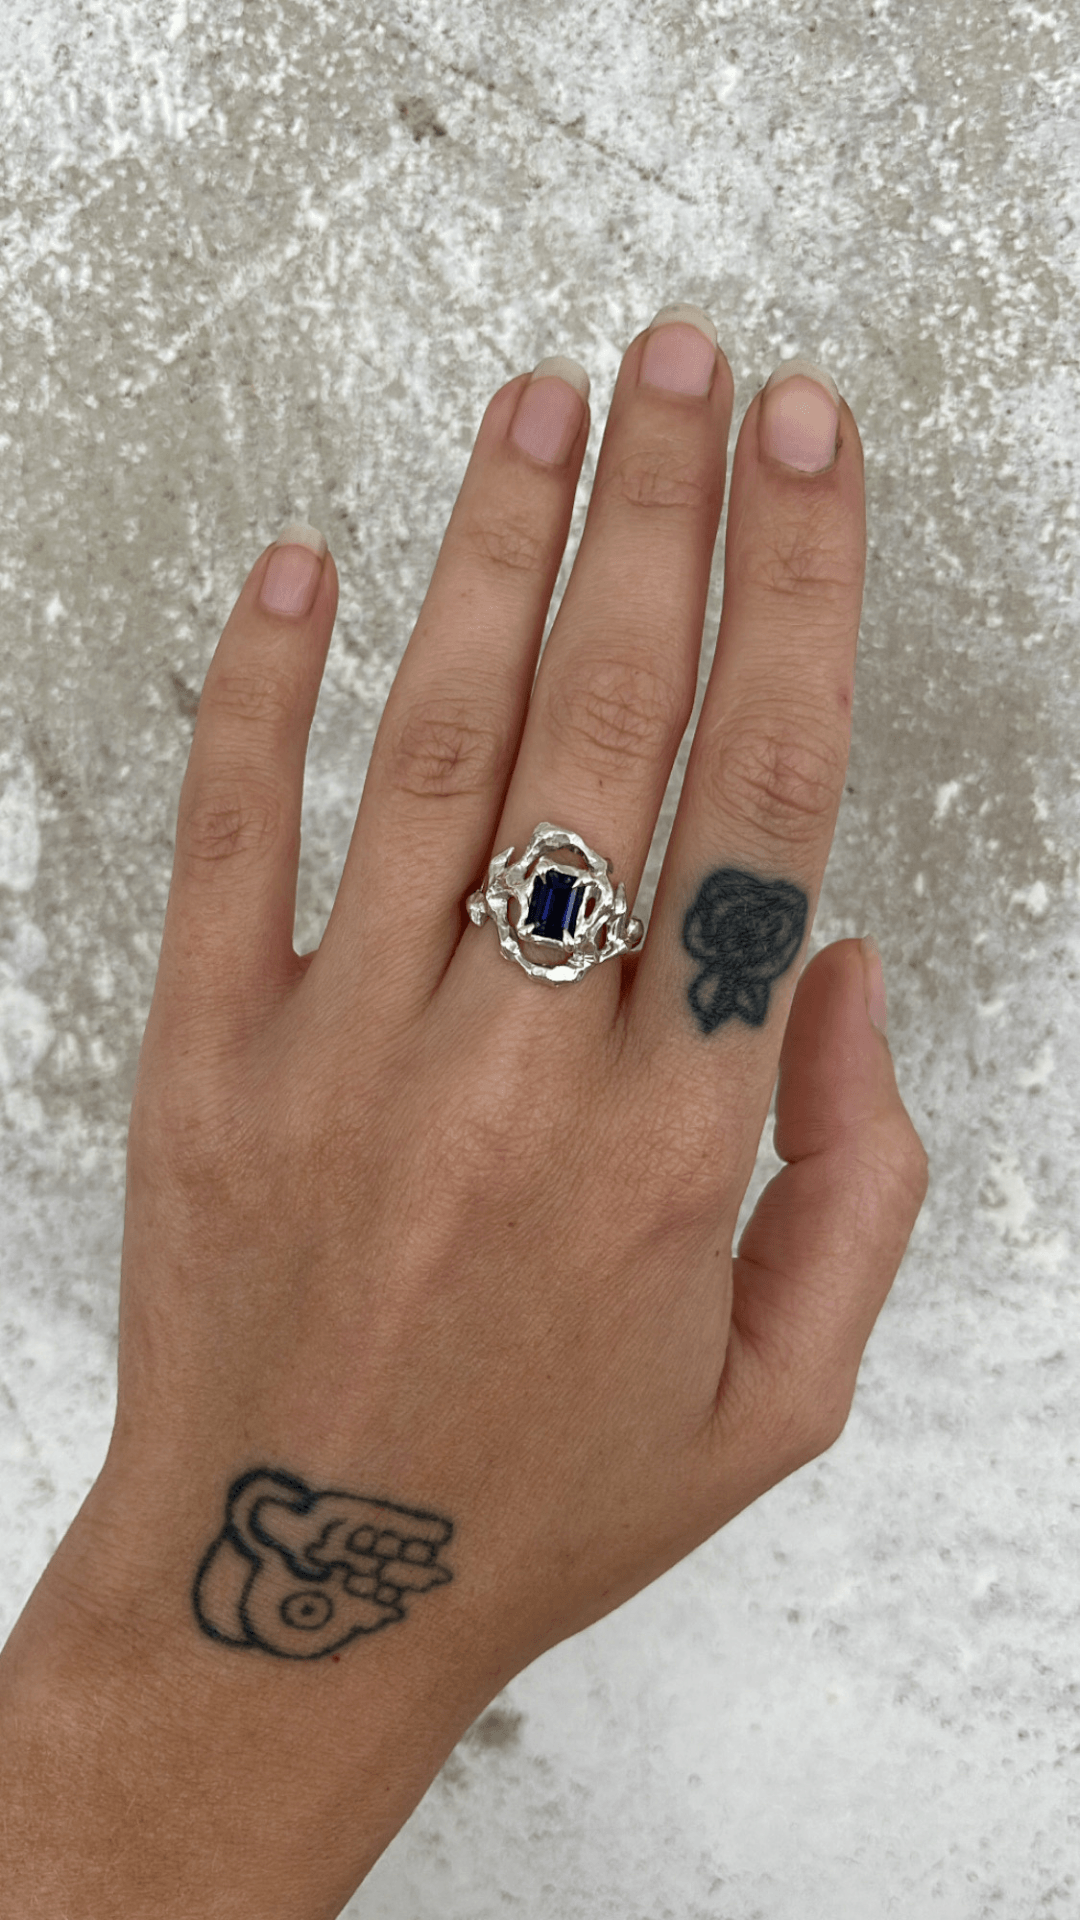 KHAOS sterling silver and Iolite ring I